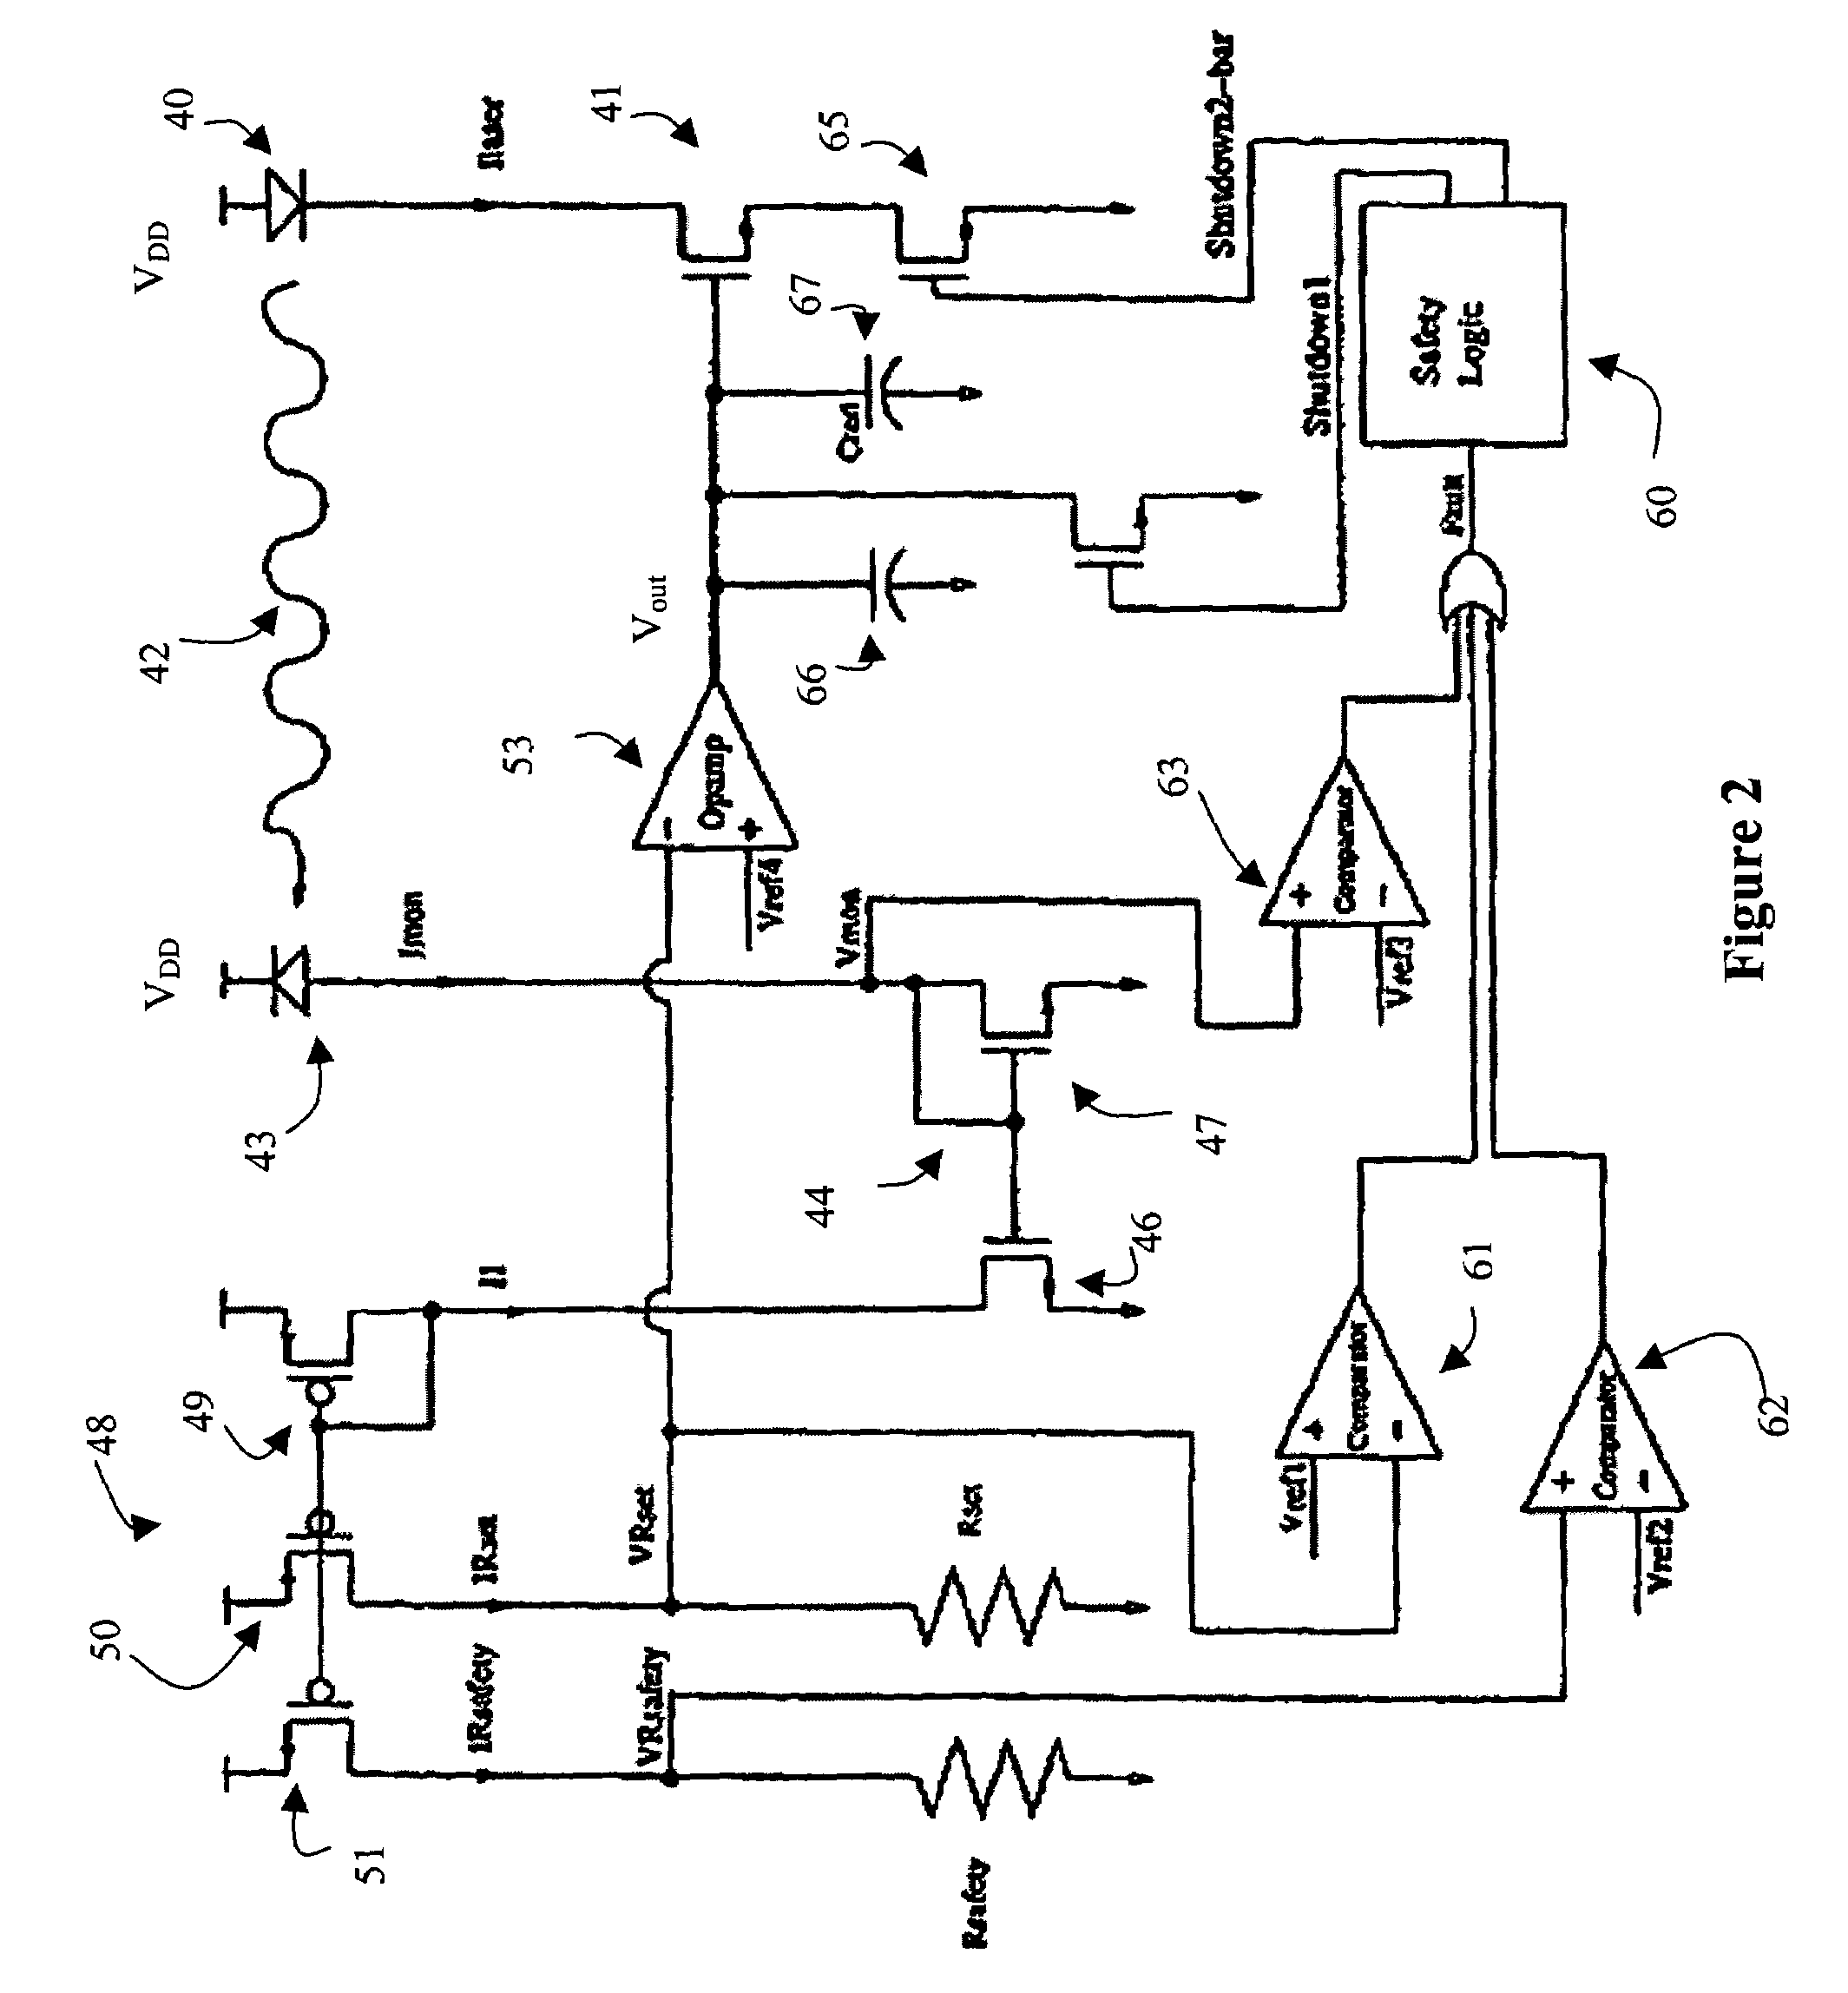 Laser diode driving circuit with safety feature